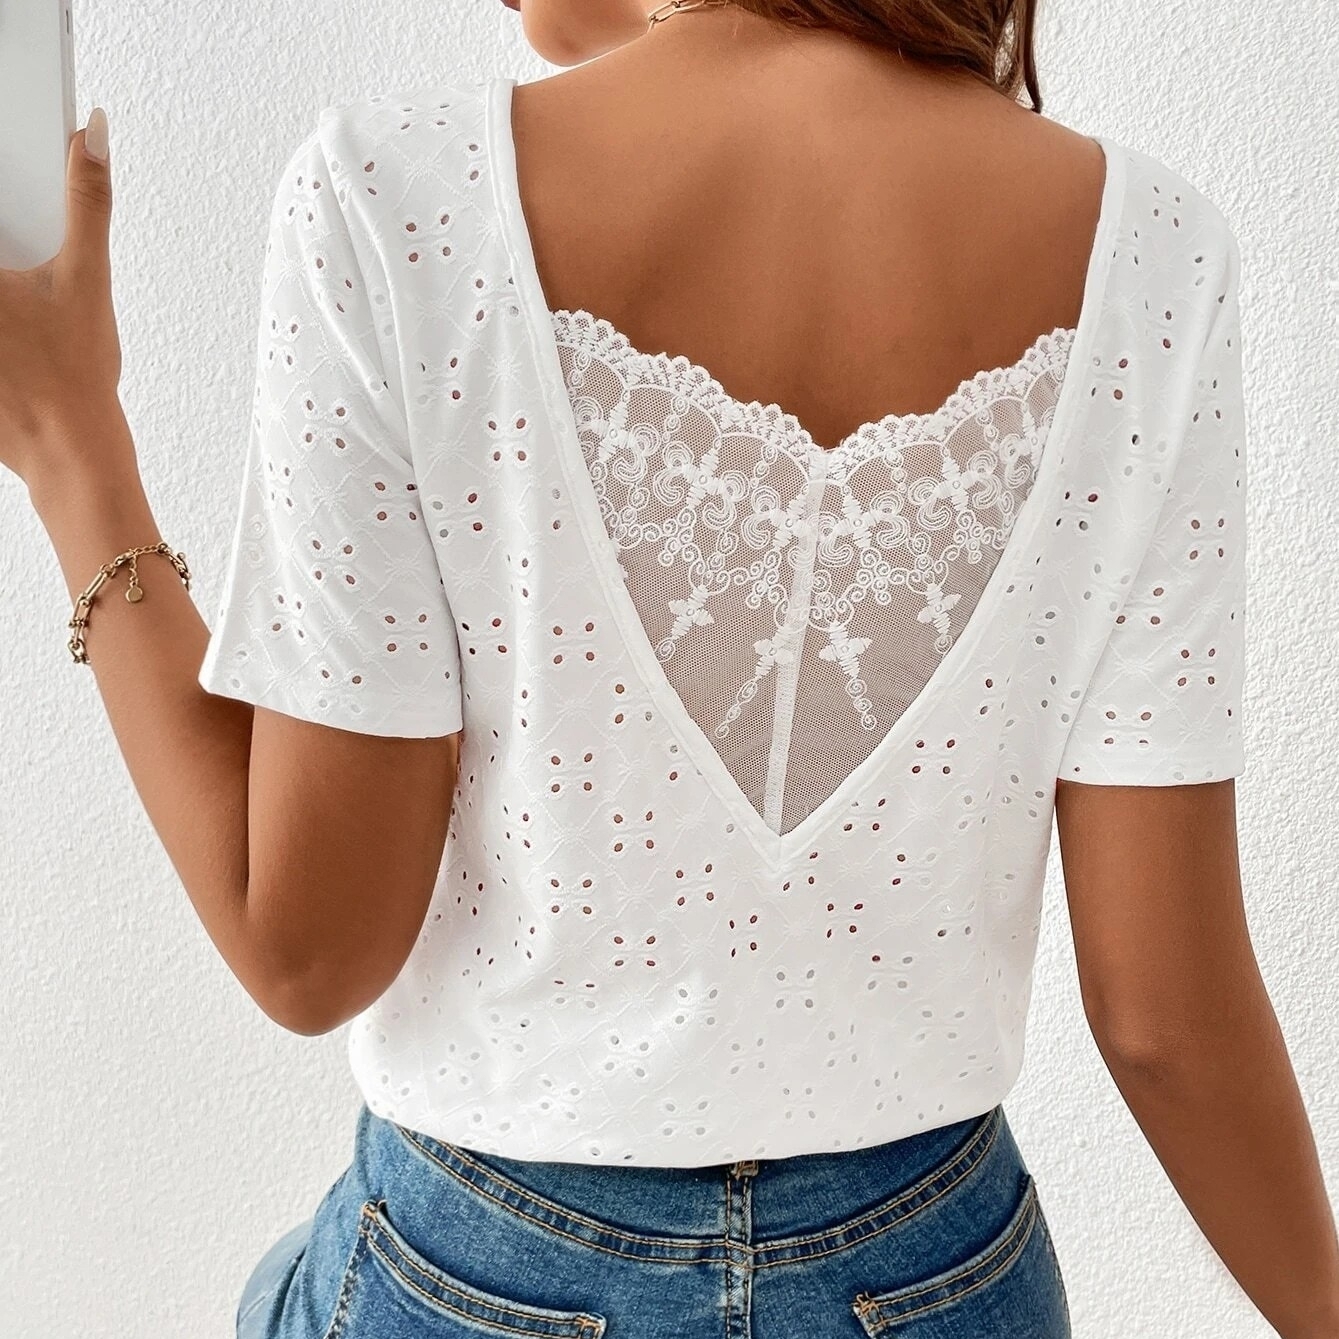 Contrast Lace Eyelet Embroidery Tee - L